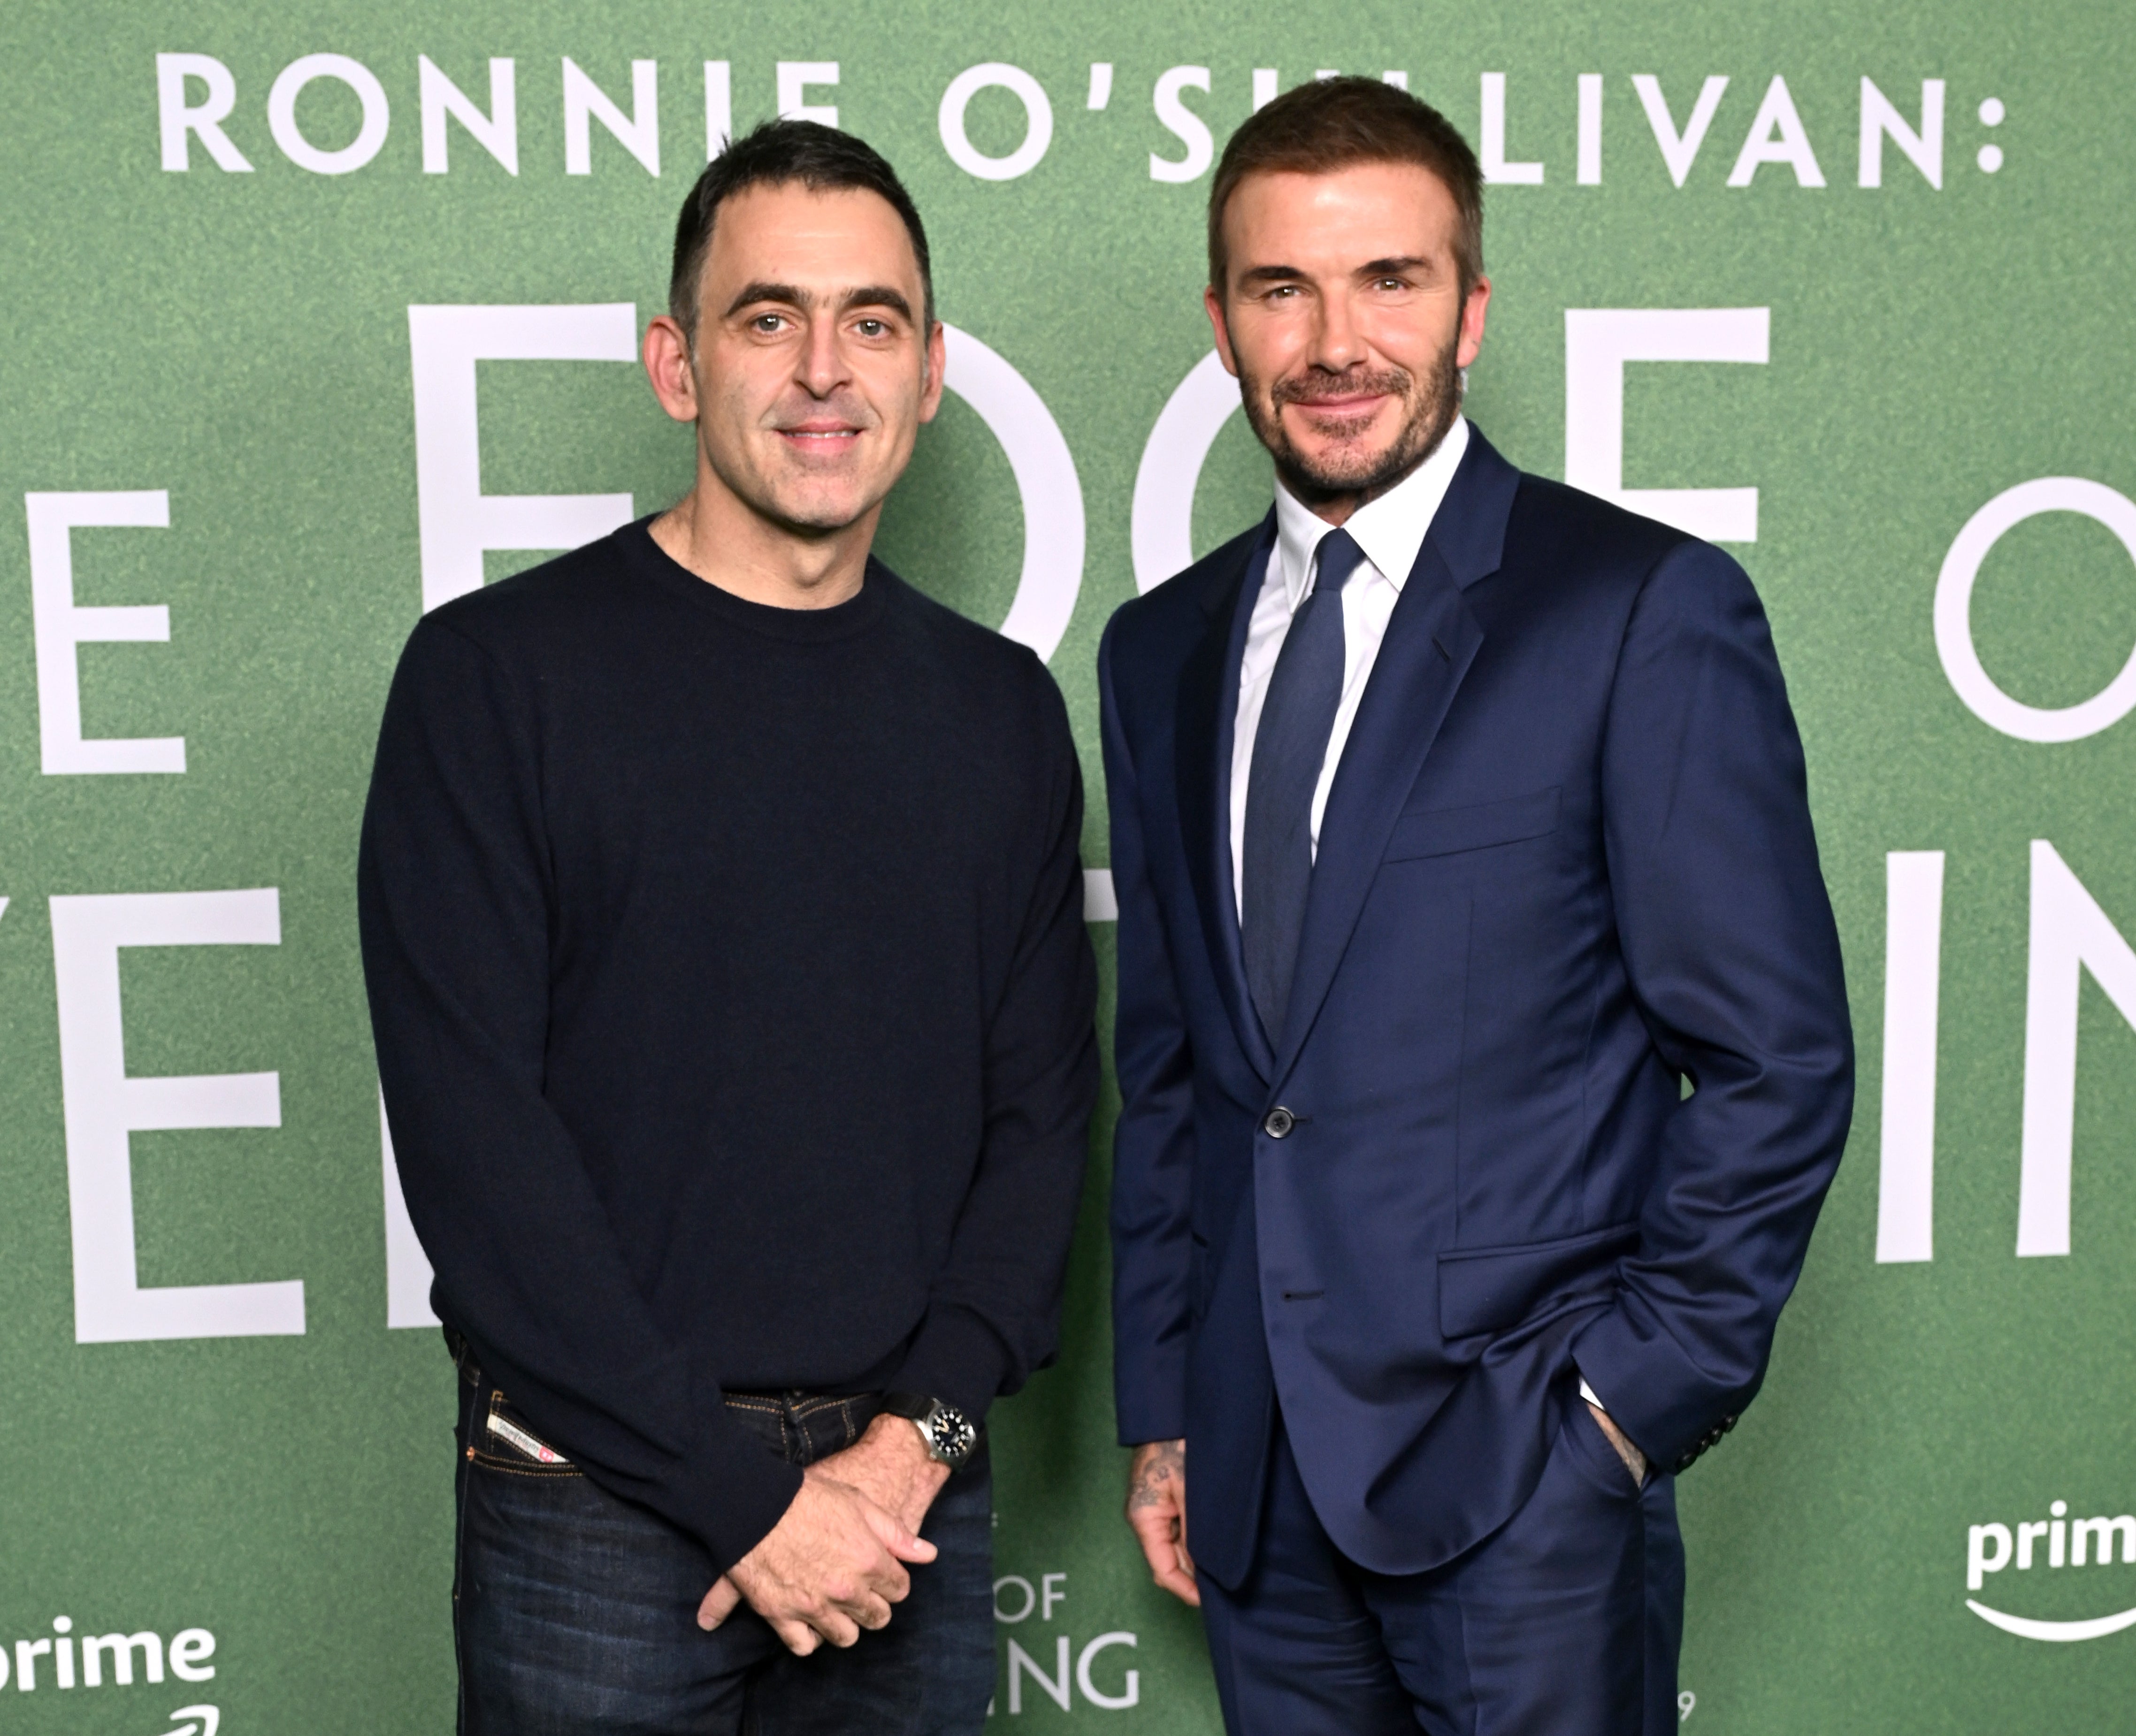 O’Sullivan and David Beckham attend the ‘The Edge of Everything’ premiere